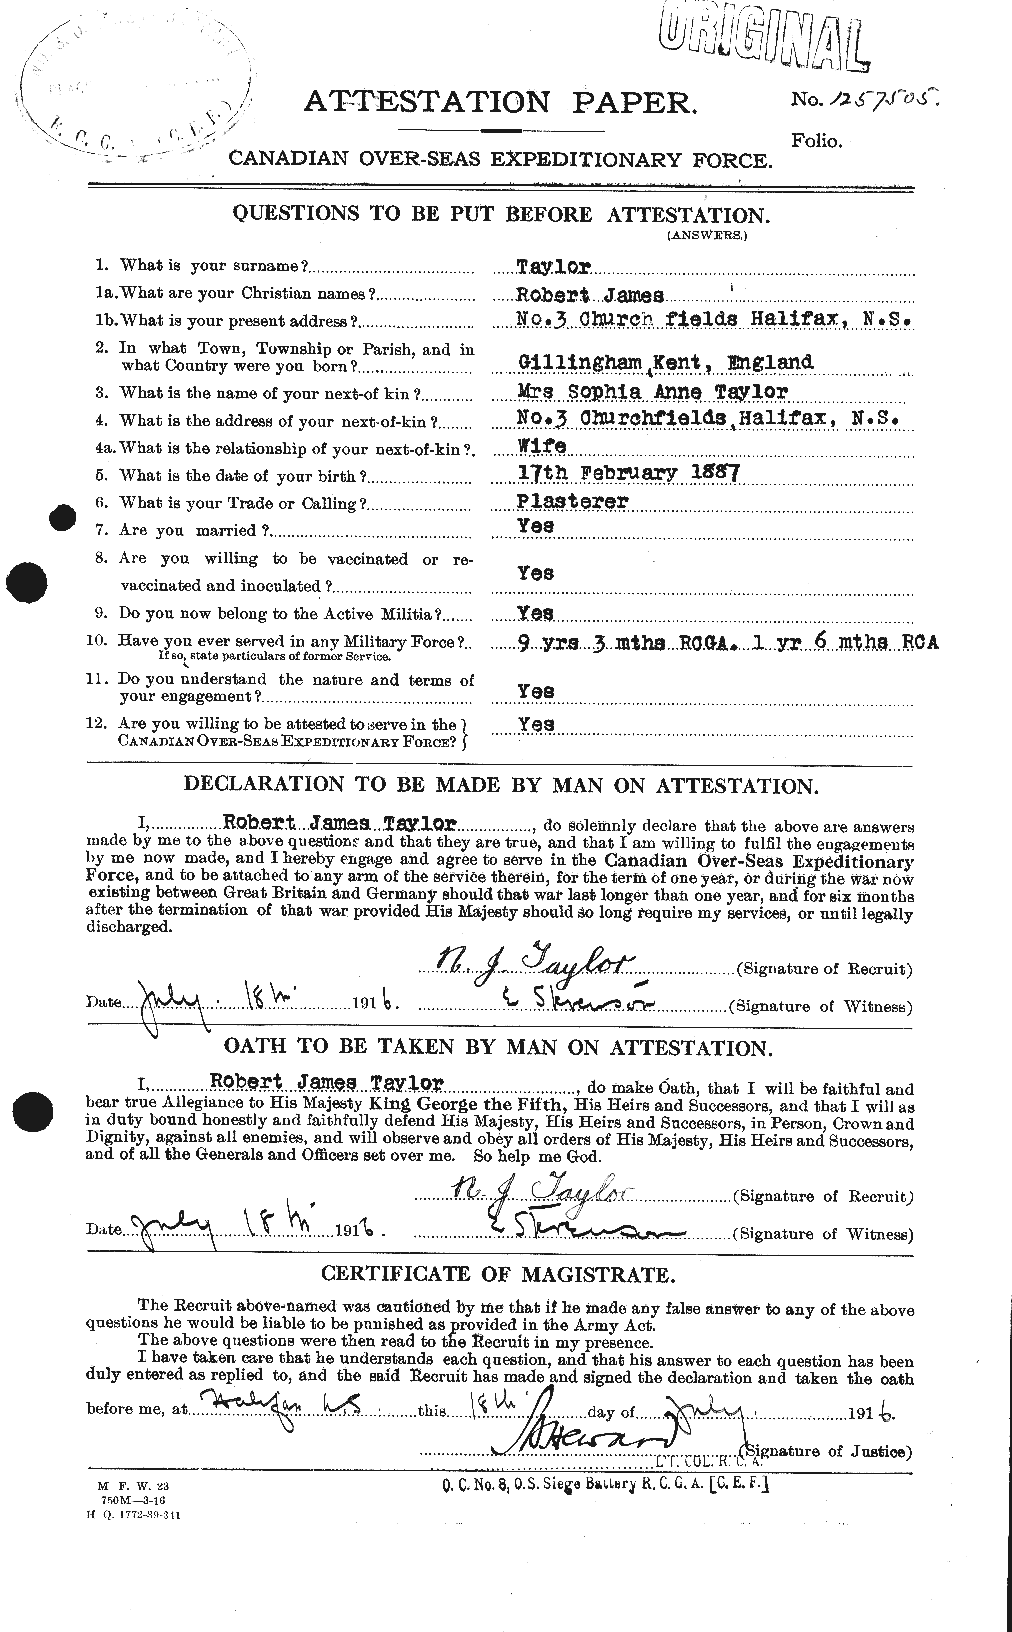 Personnel Records of the First World War - CEF 627485a